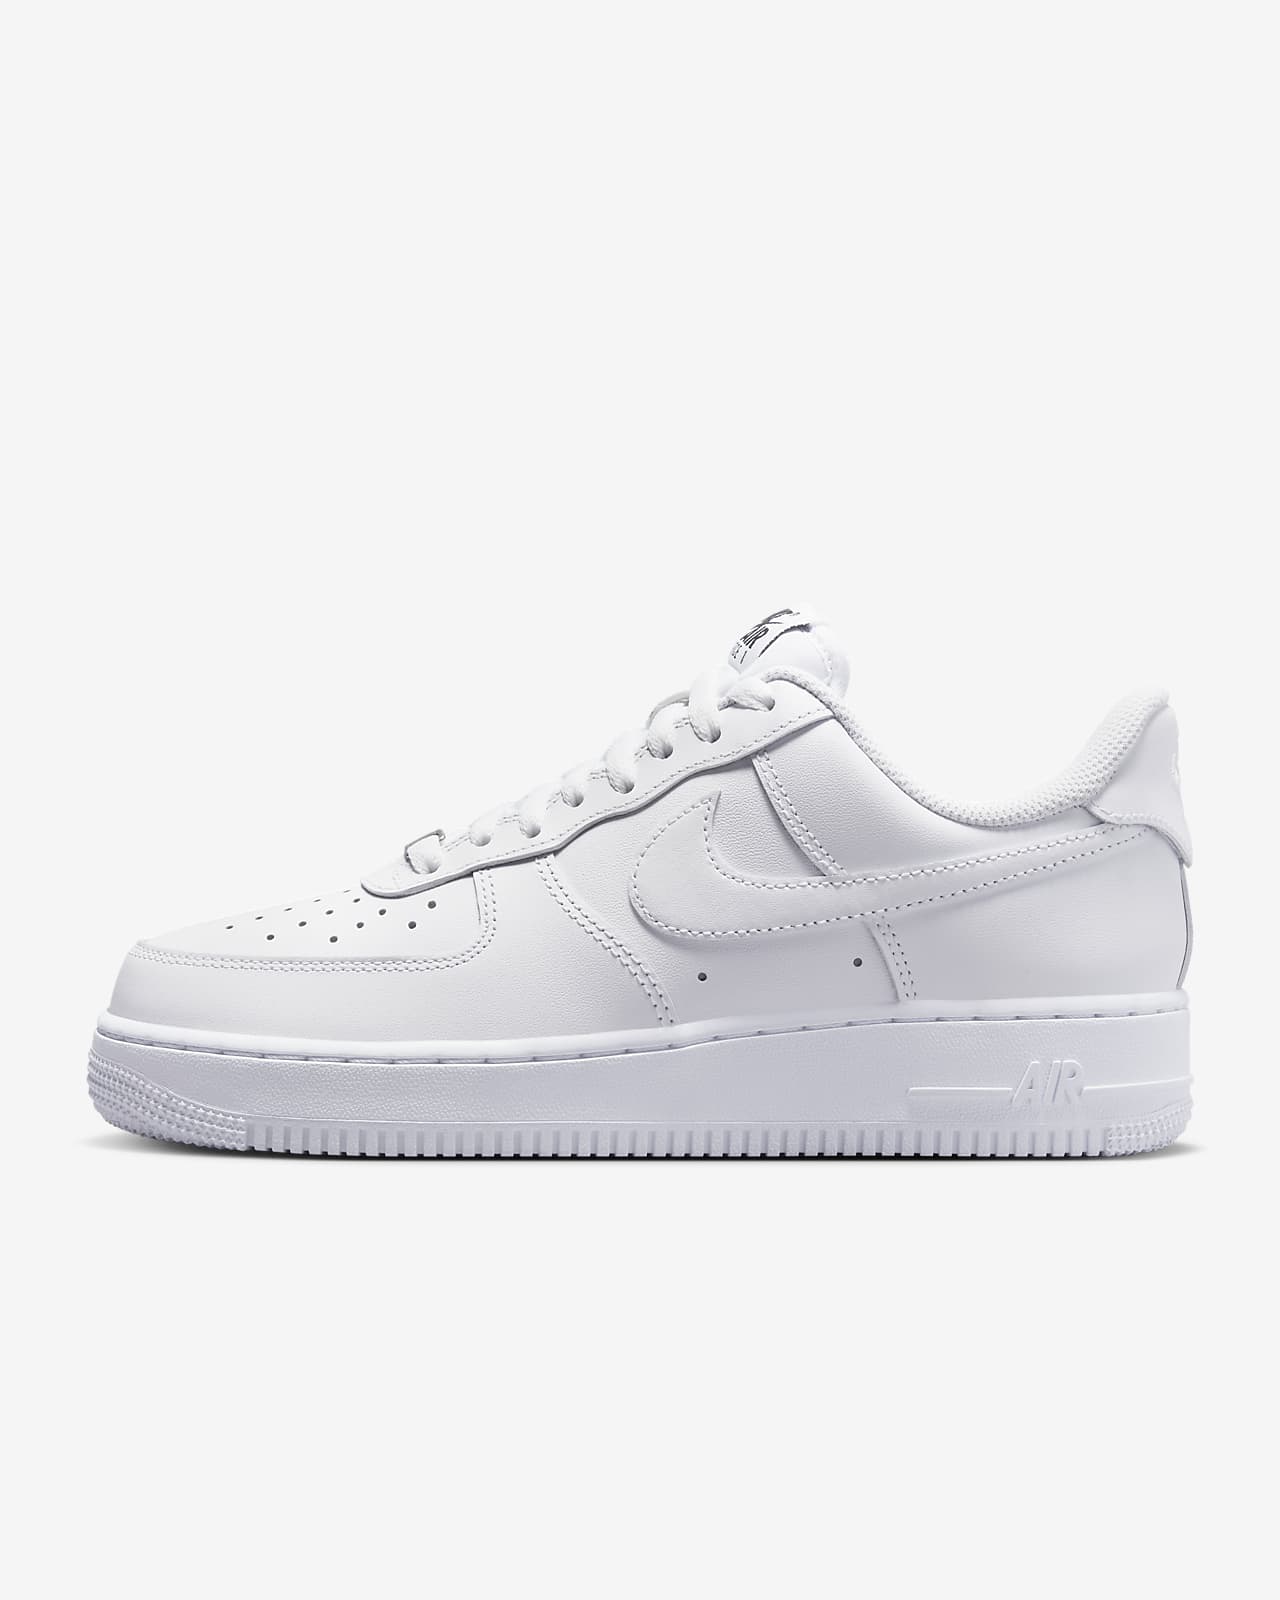 Nike Air Force 1 '07 FlyEase Women's Shoes